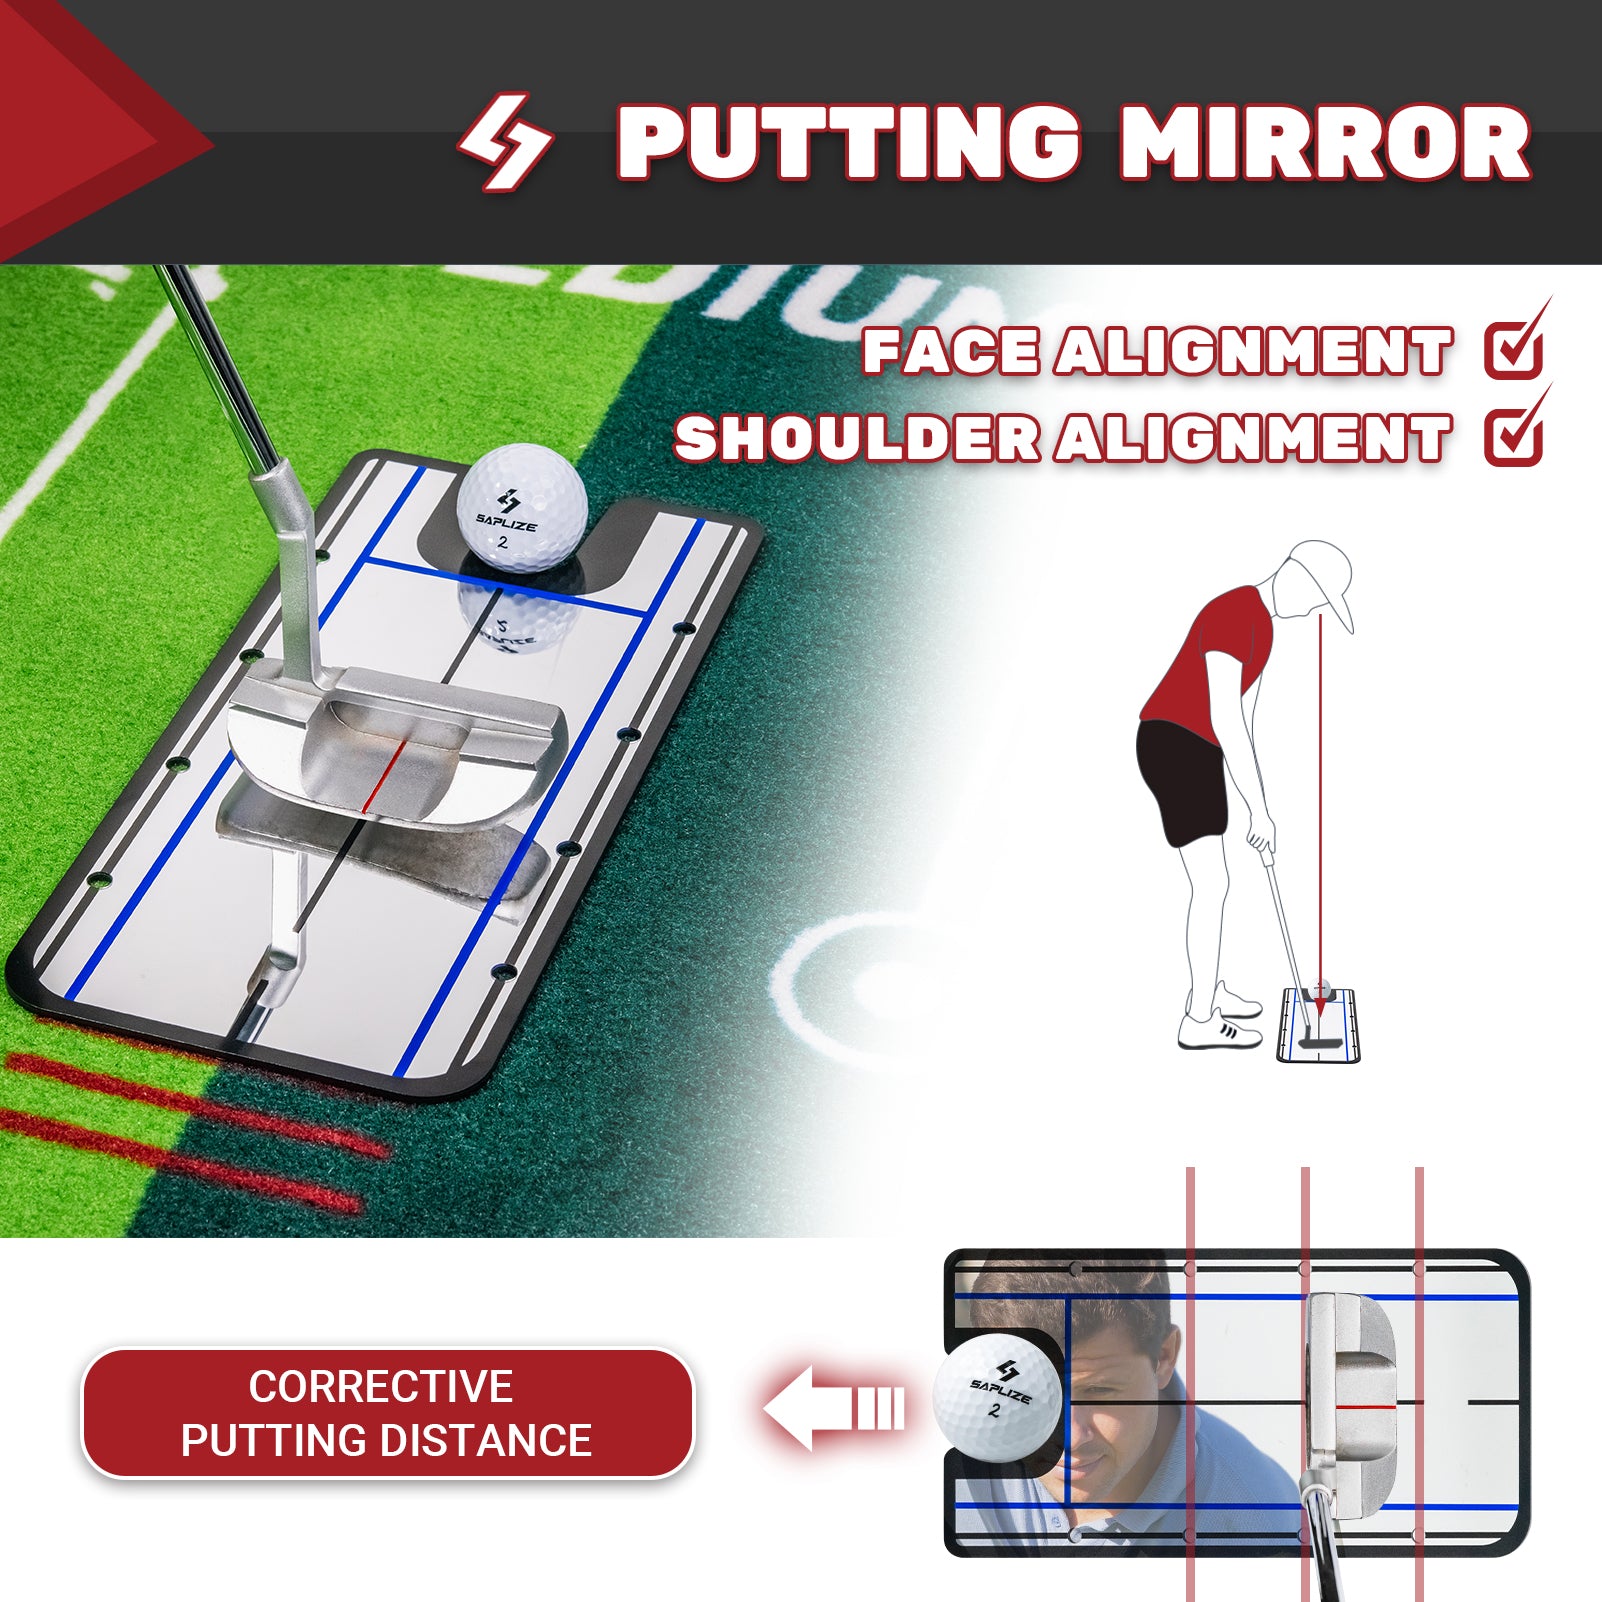 SAPLIZE Two-Speed Golf Putting Practice Mat with Putting Alignment Mirror, 20 in X 10 ft